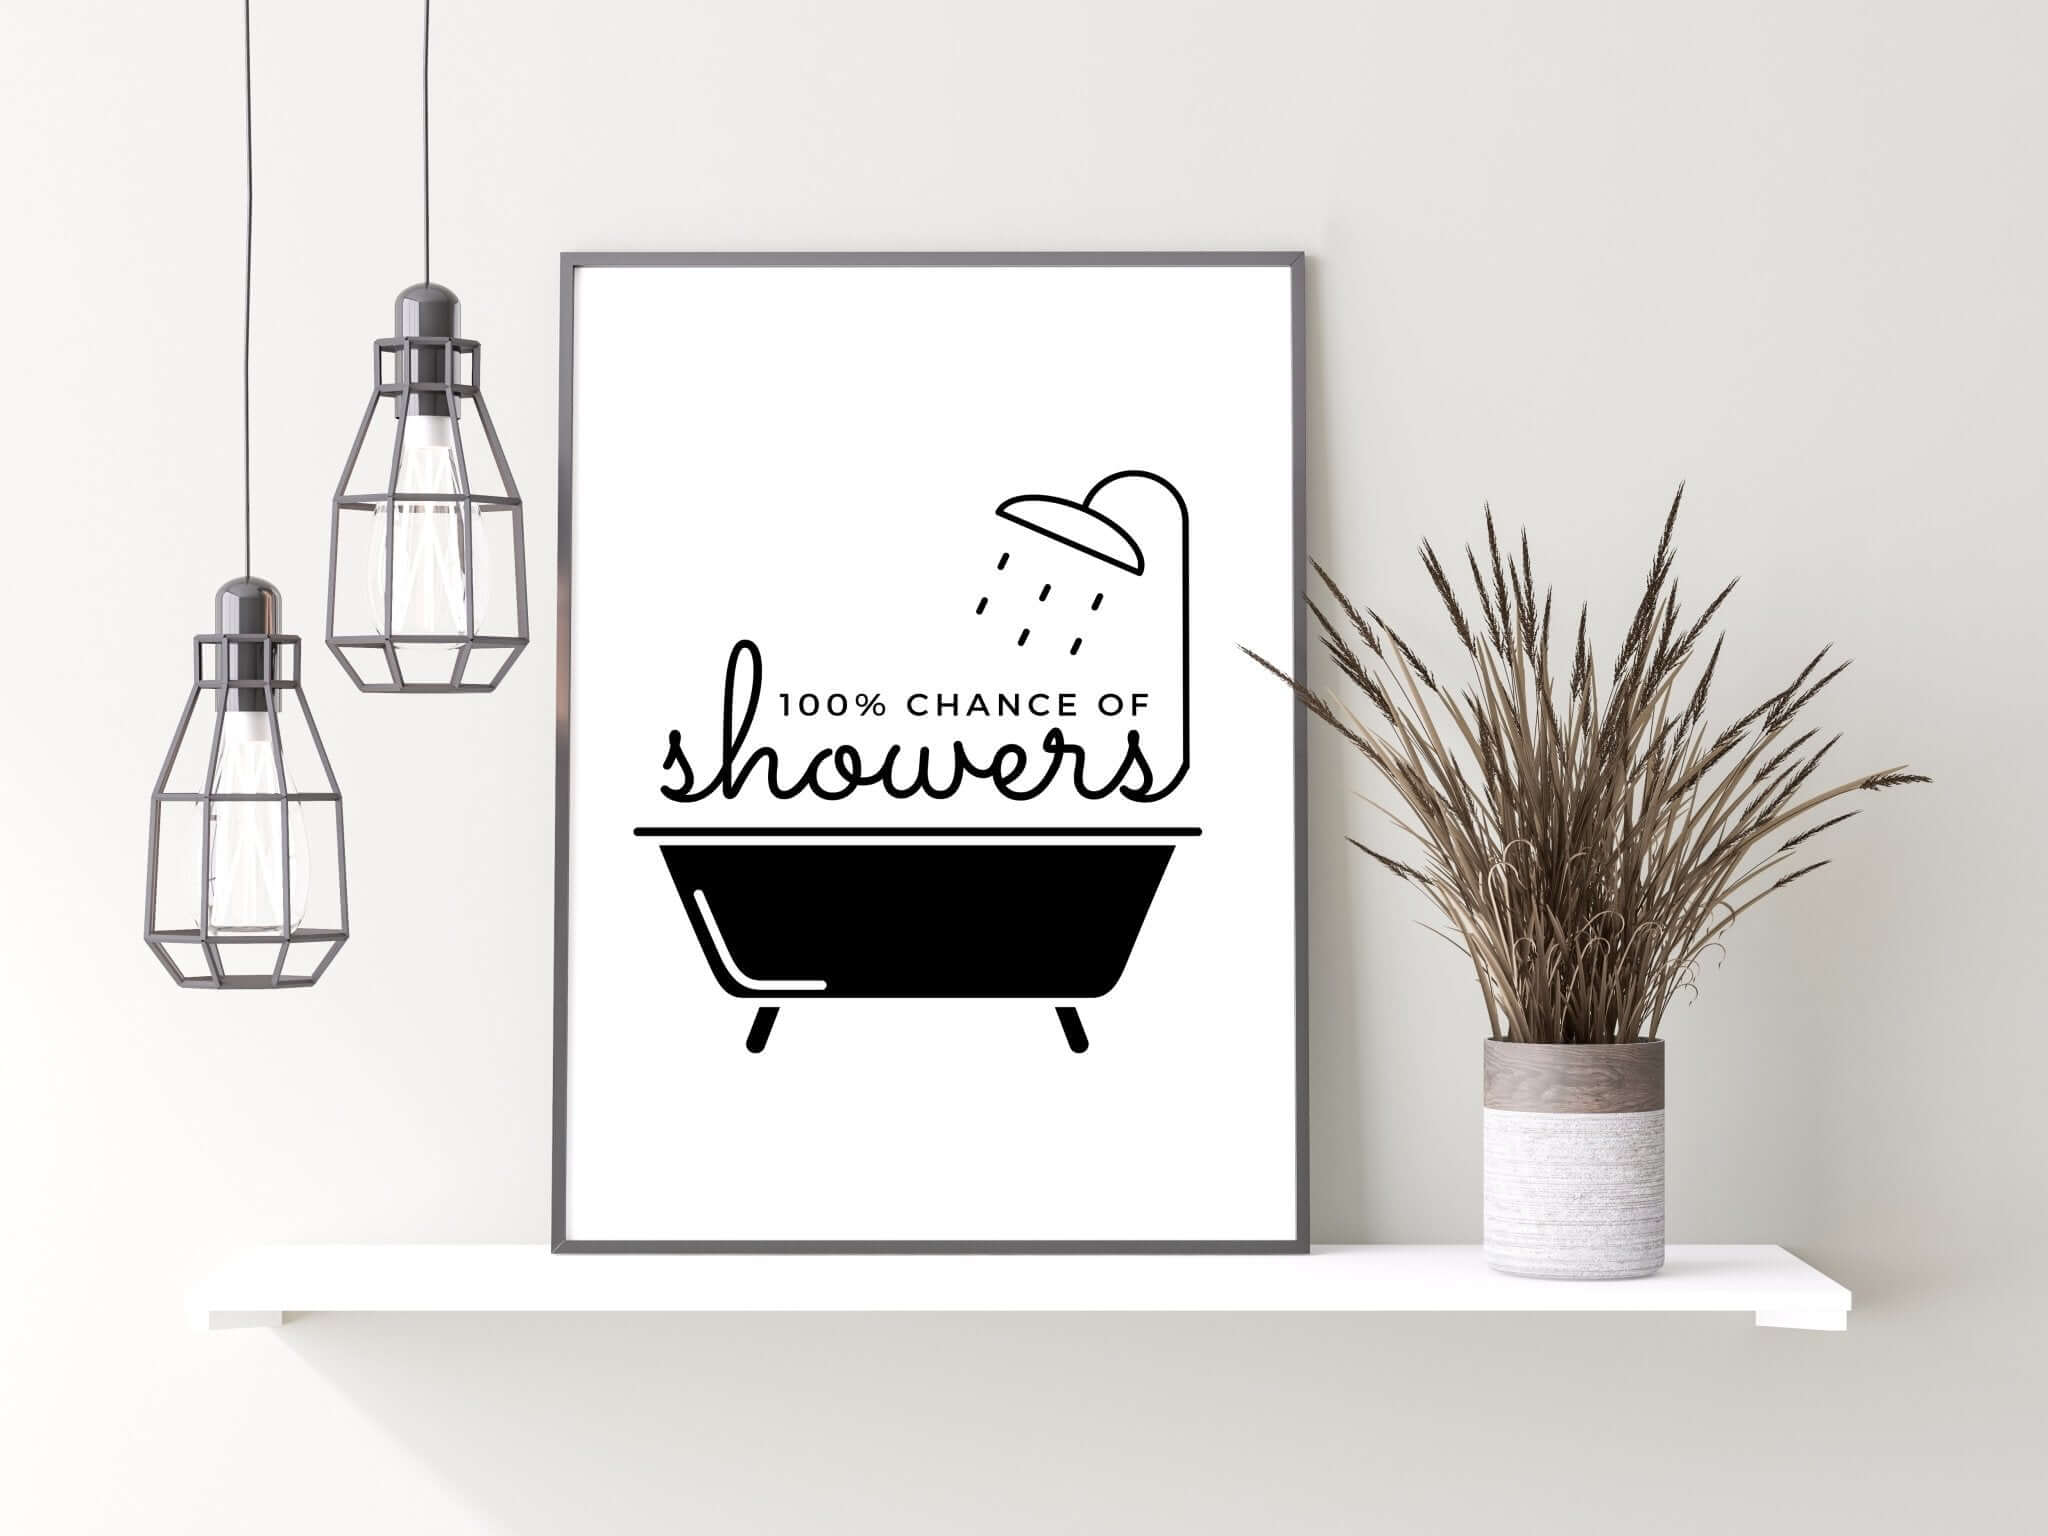 100% Chance of Showers | Shower Print